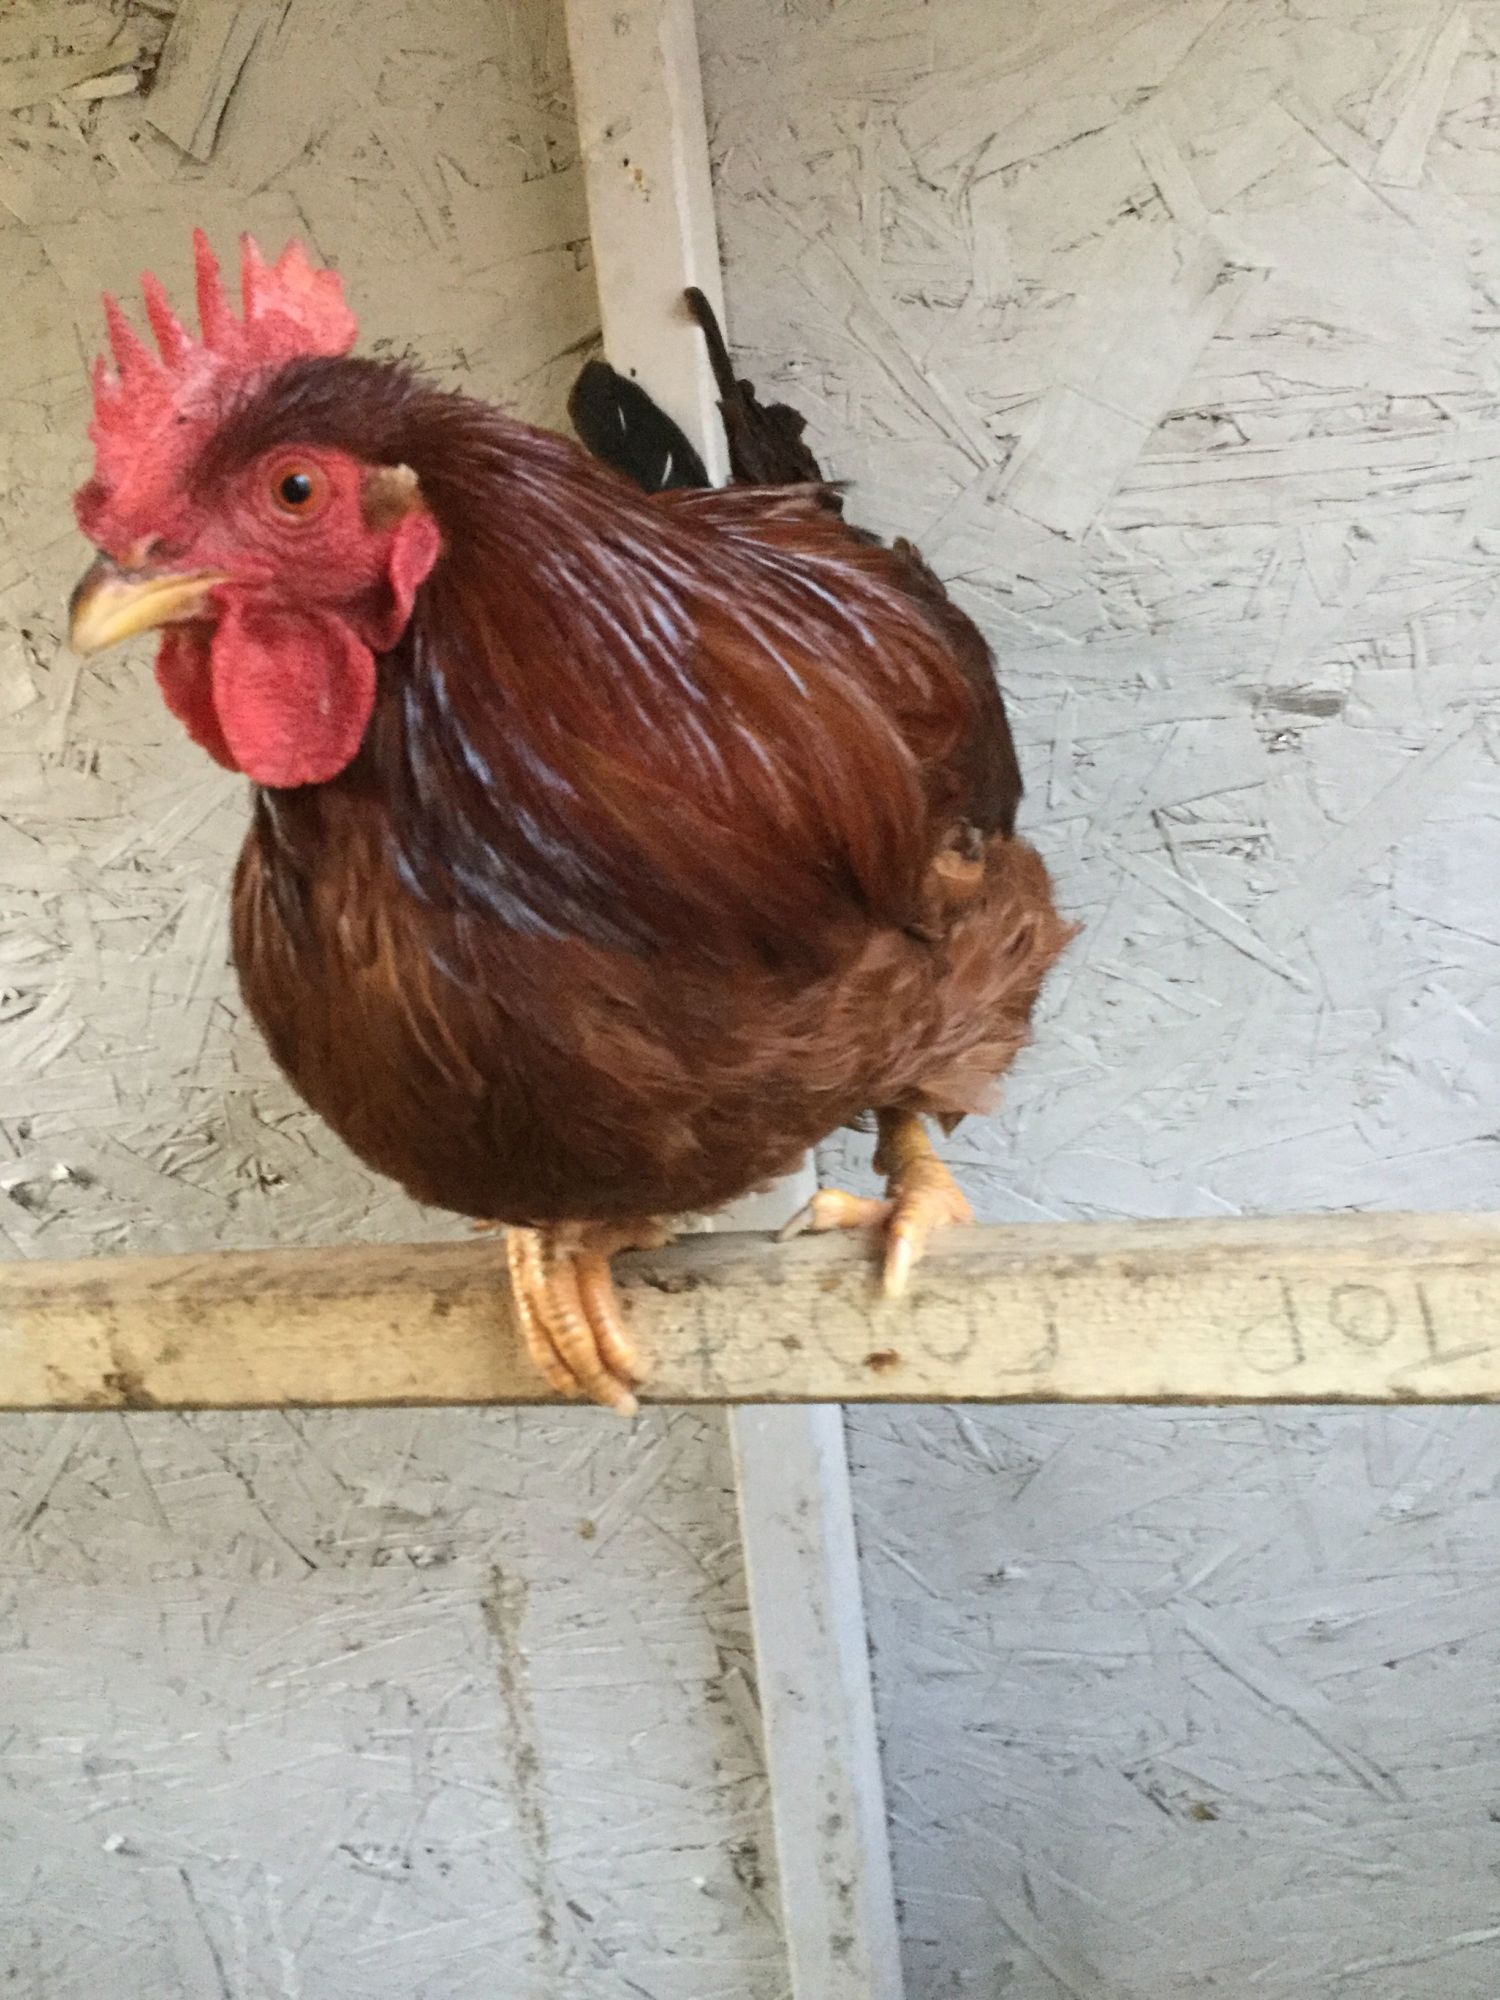 This is my rooster from my first hatch he is the brother of tootsie, Roada, and Holly they had another sister but she dies at 4 months to an unknownn cause and she was my favorite out of the bunch.